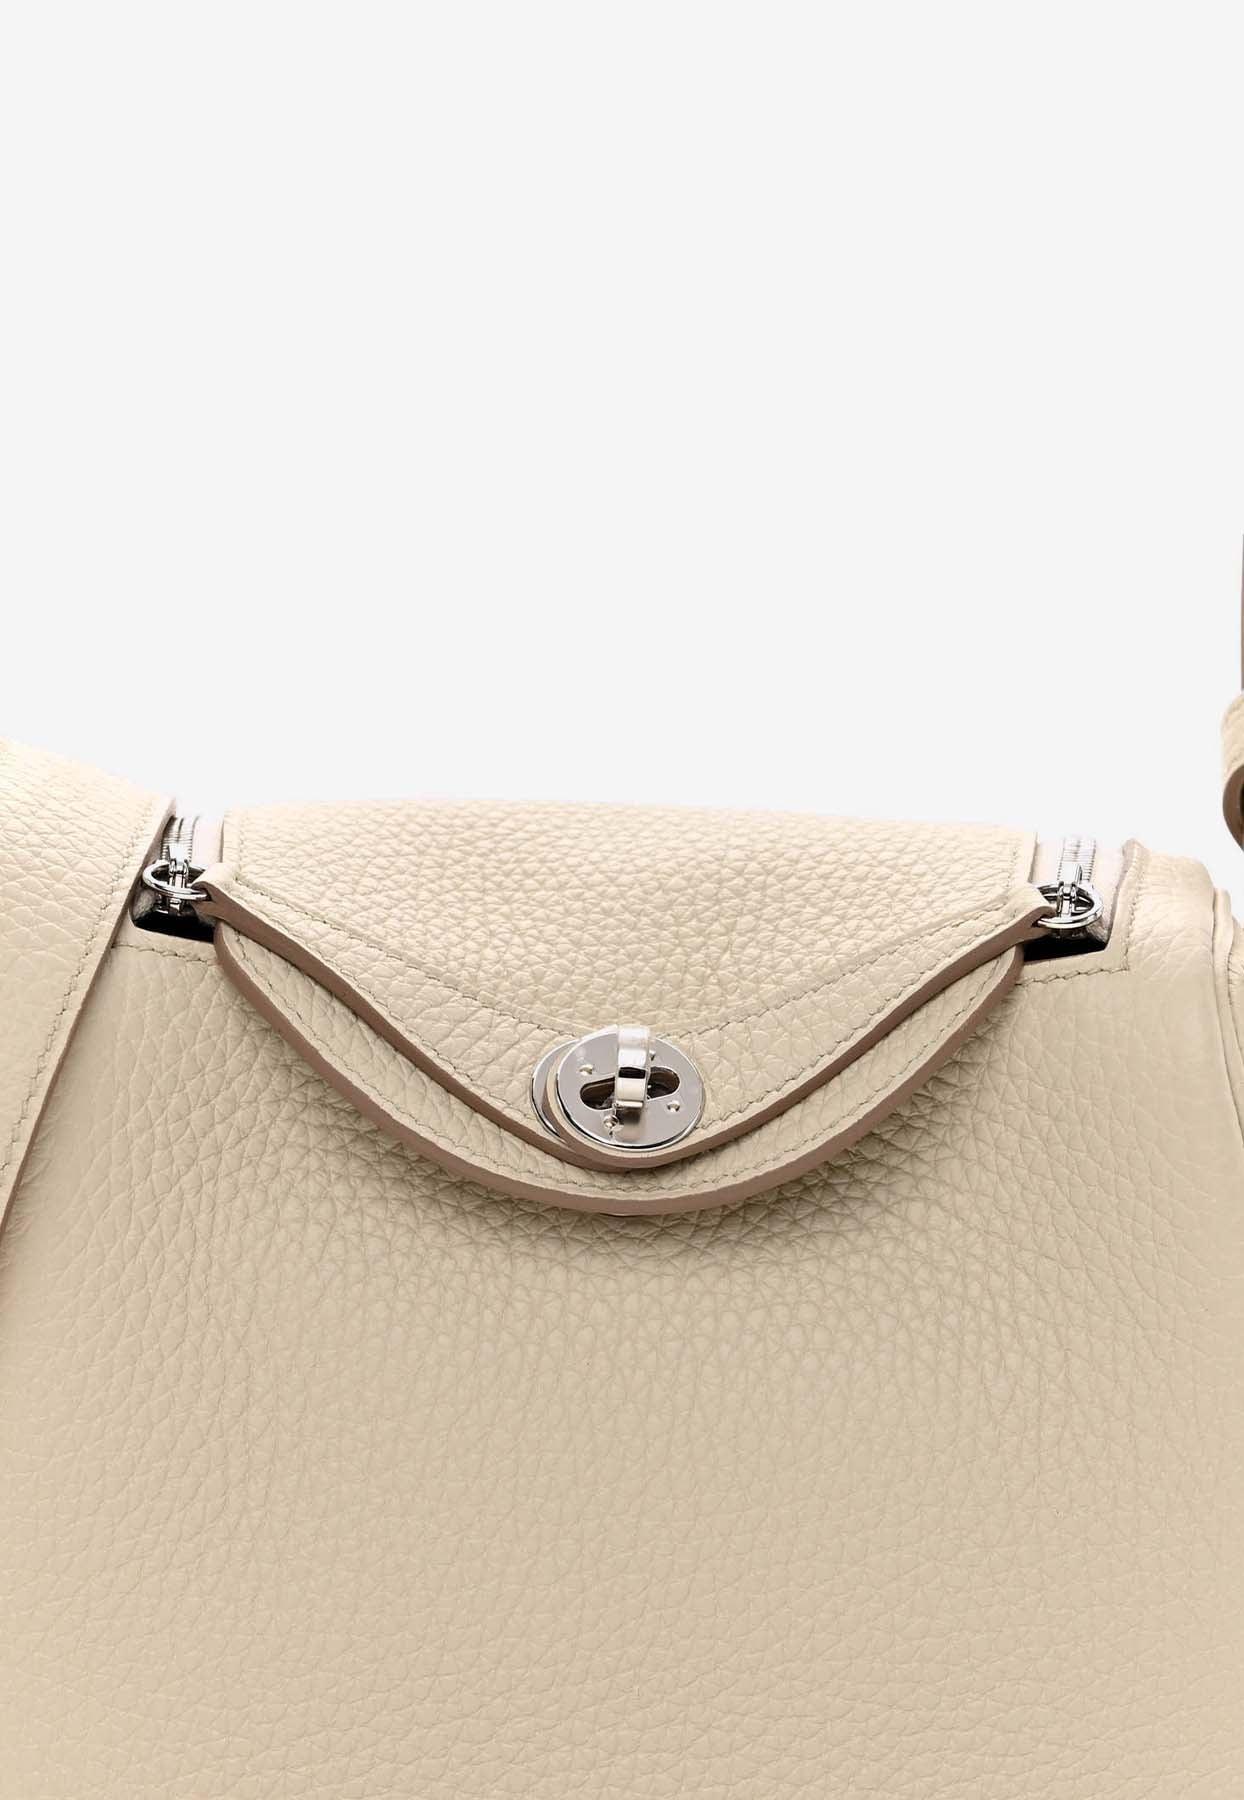 HERMES Taurillon Clemence Mini Lindy 20 Biscuit | FASHIONPHILE